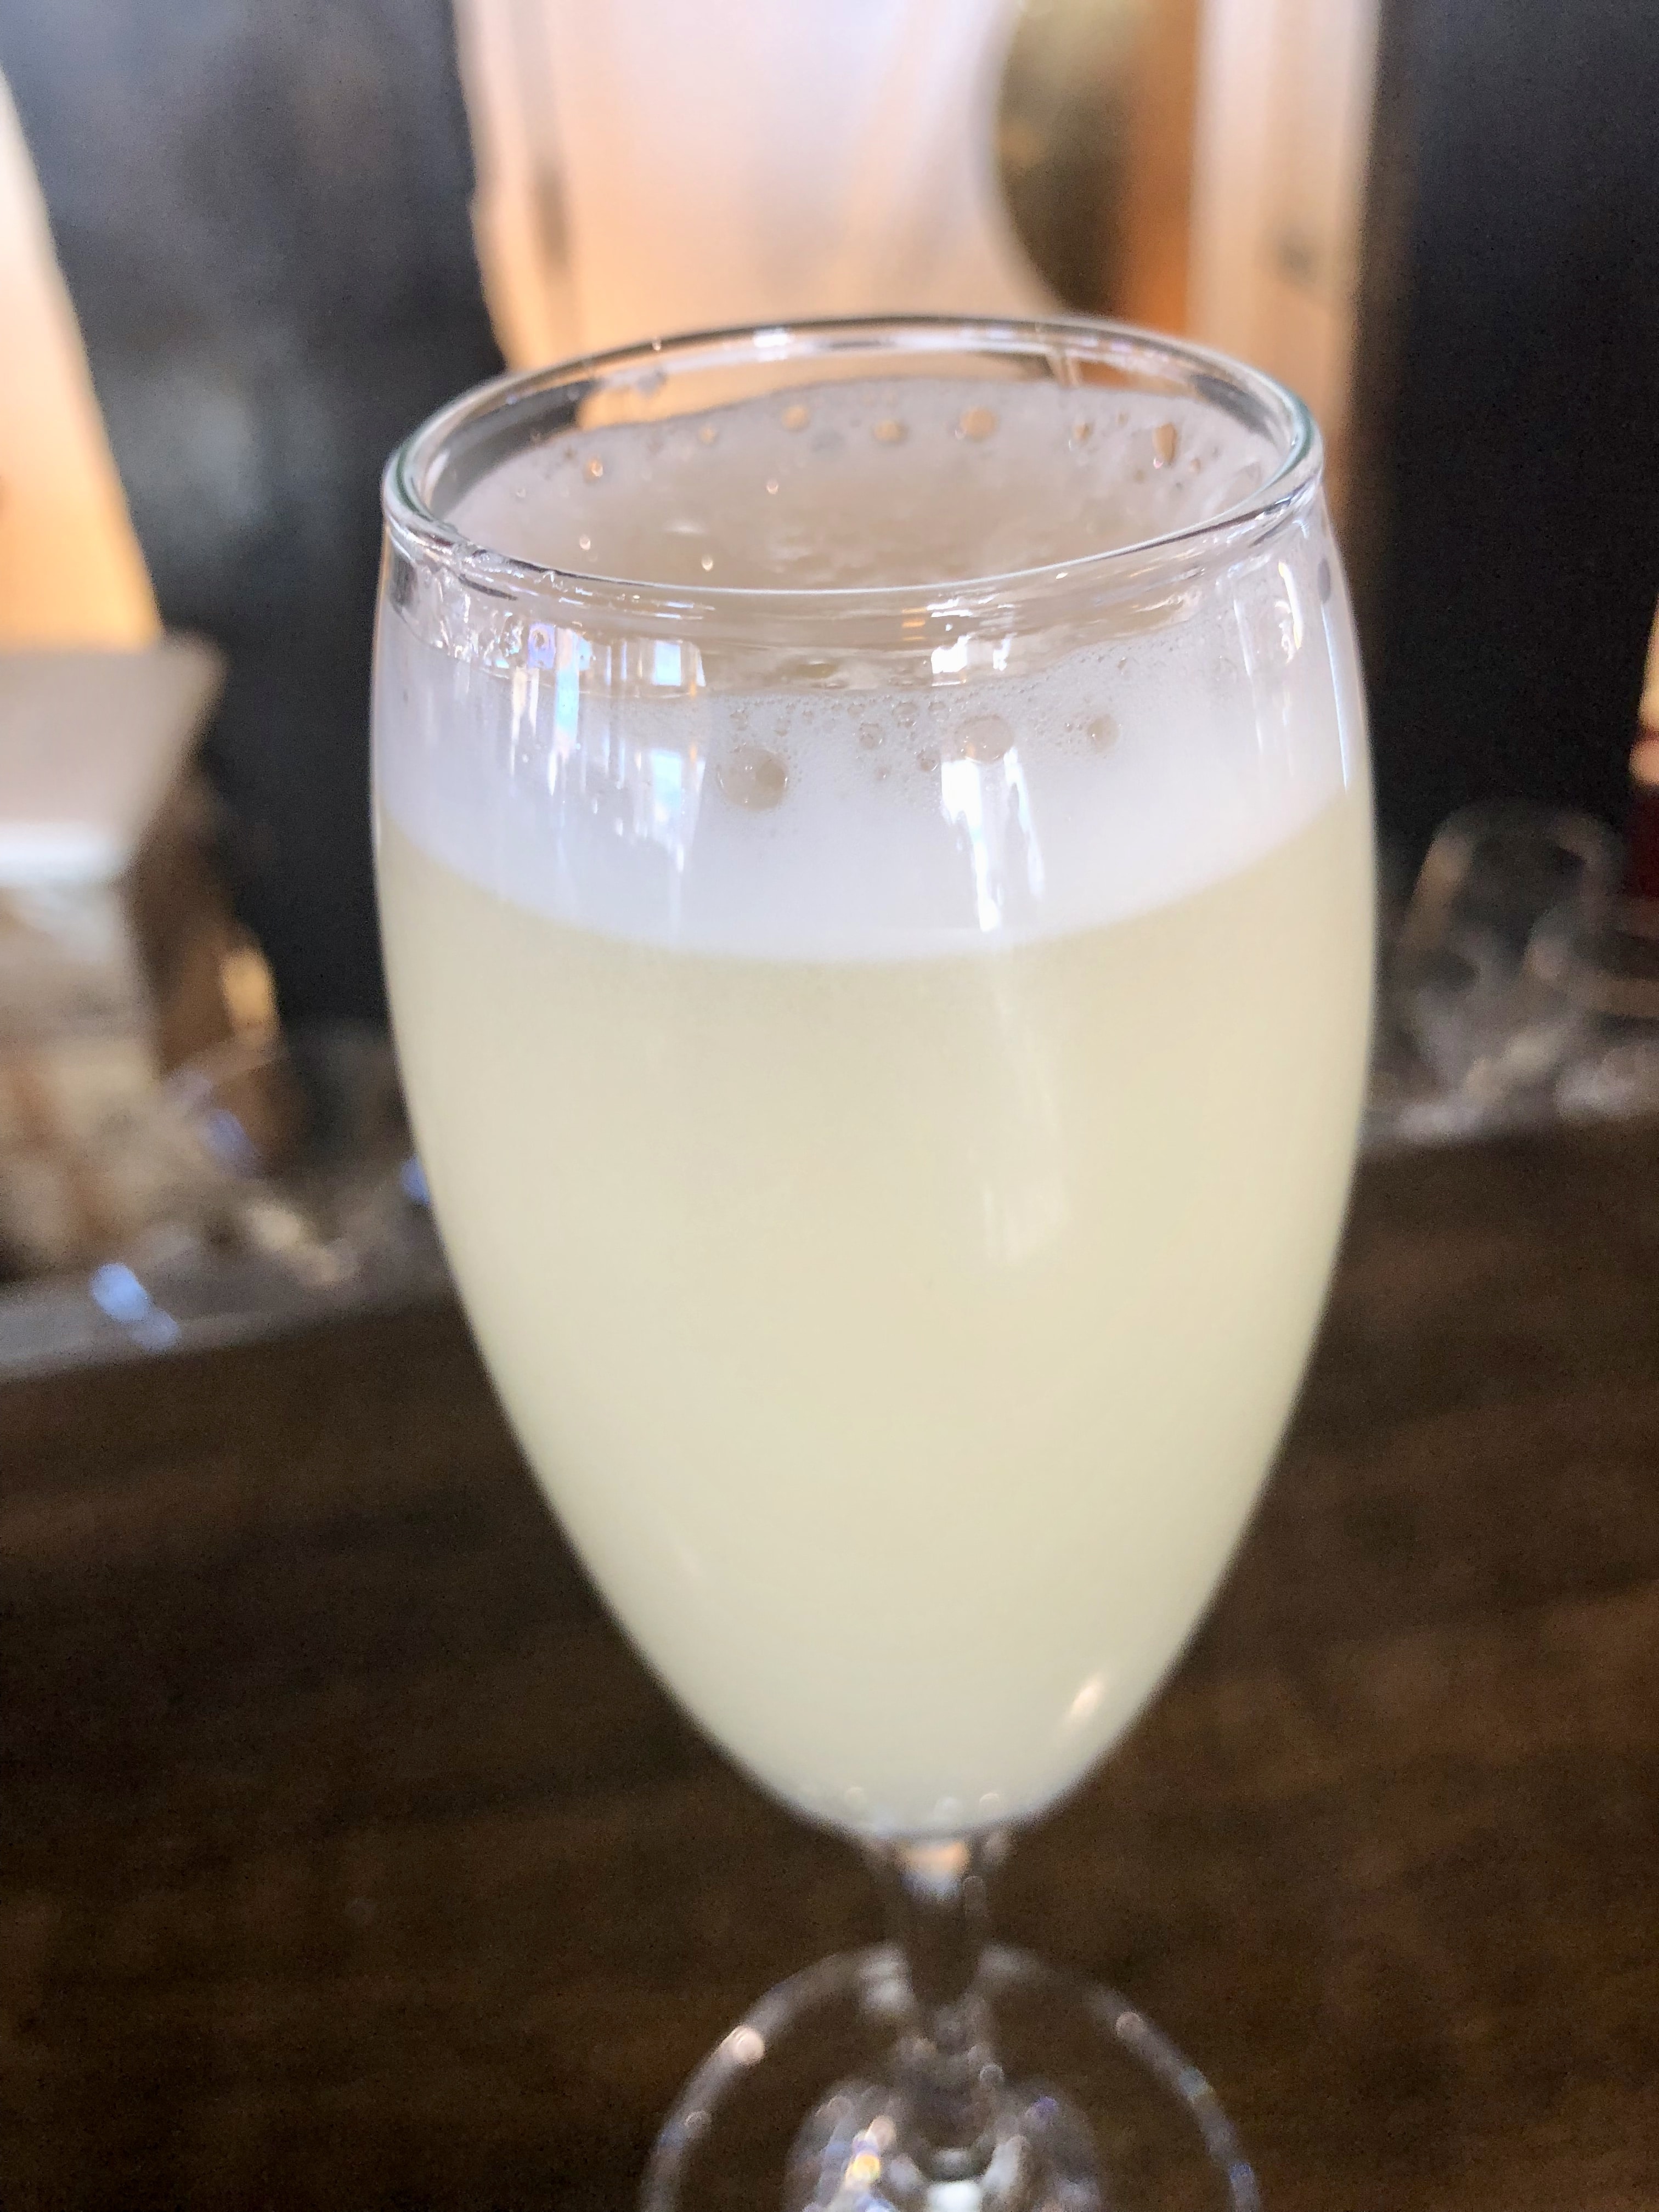 The Iconic Pisco Sour